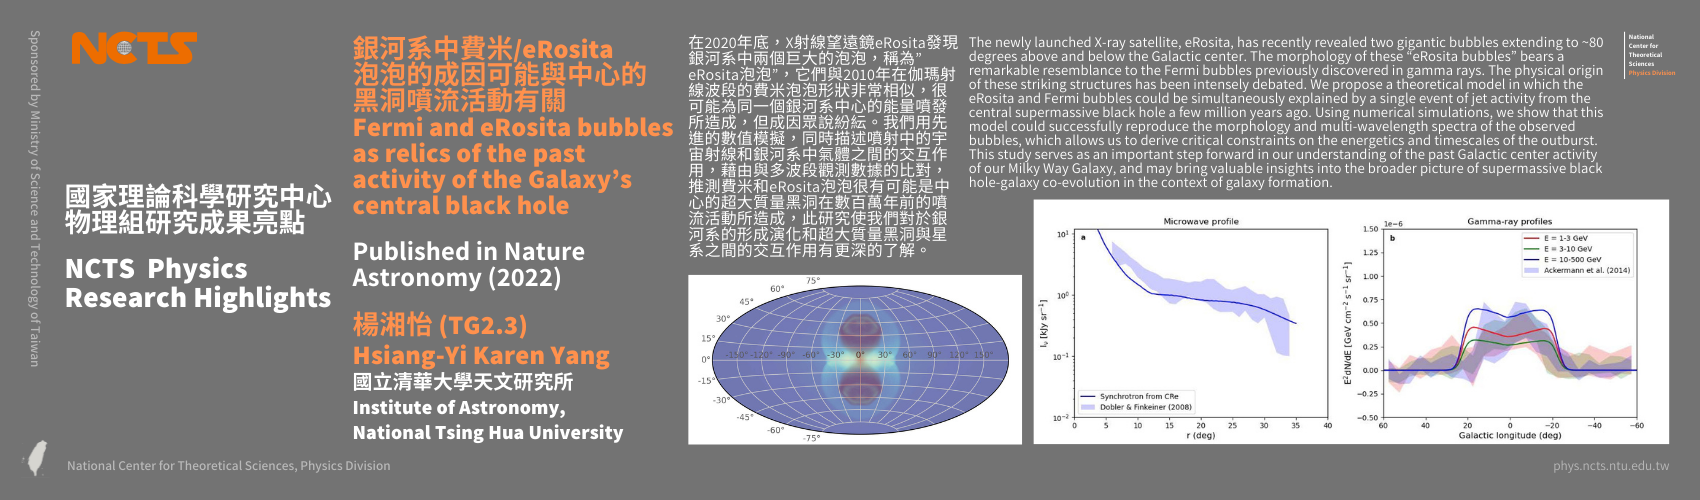 [NCTS Physics Research Highlights] Hsiang-Yi Karen Yang 'Fermi and eRosita bubbles as relics of the past activity of the Galaxy’s central black hole', Nature Astronomy (2022)